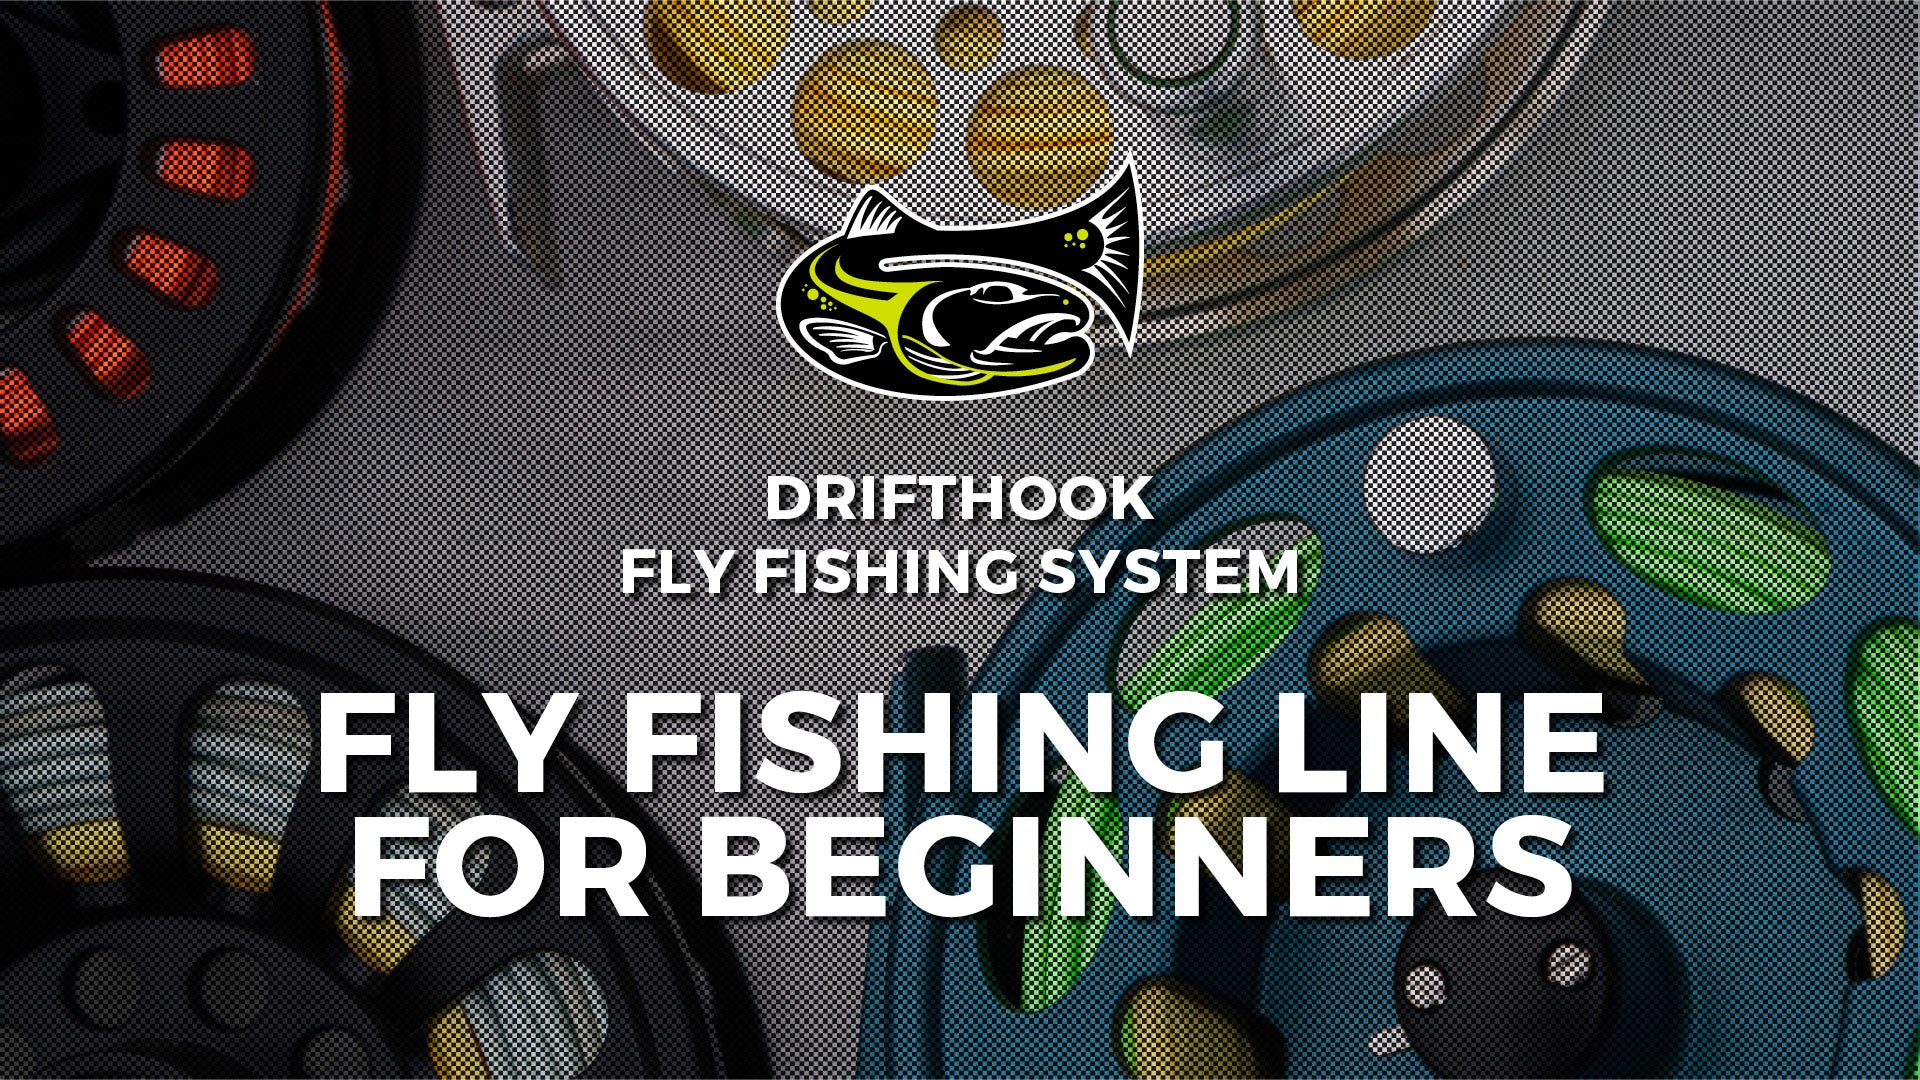 Fly Fishing Line for Beginners